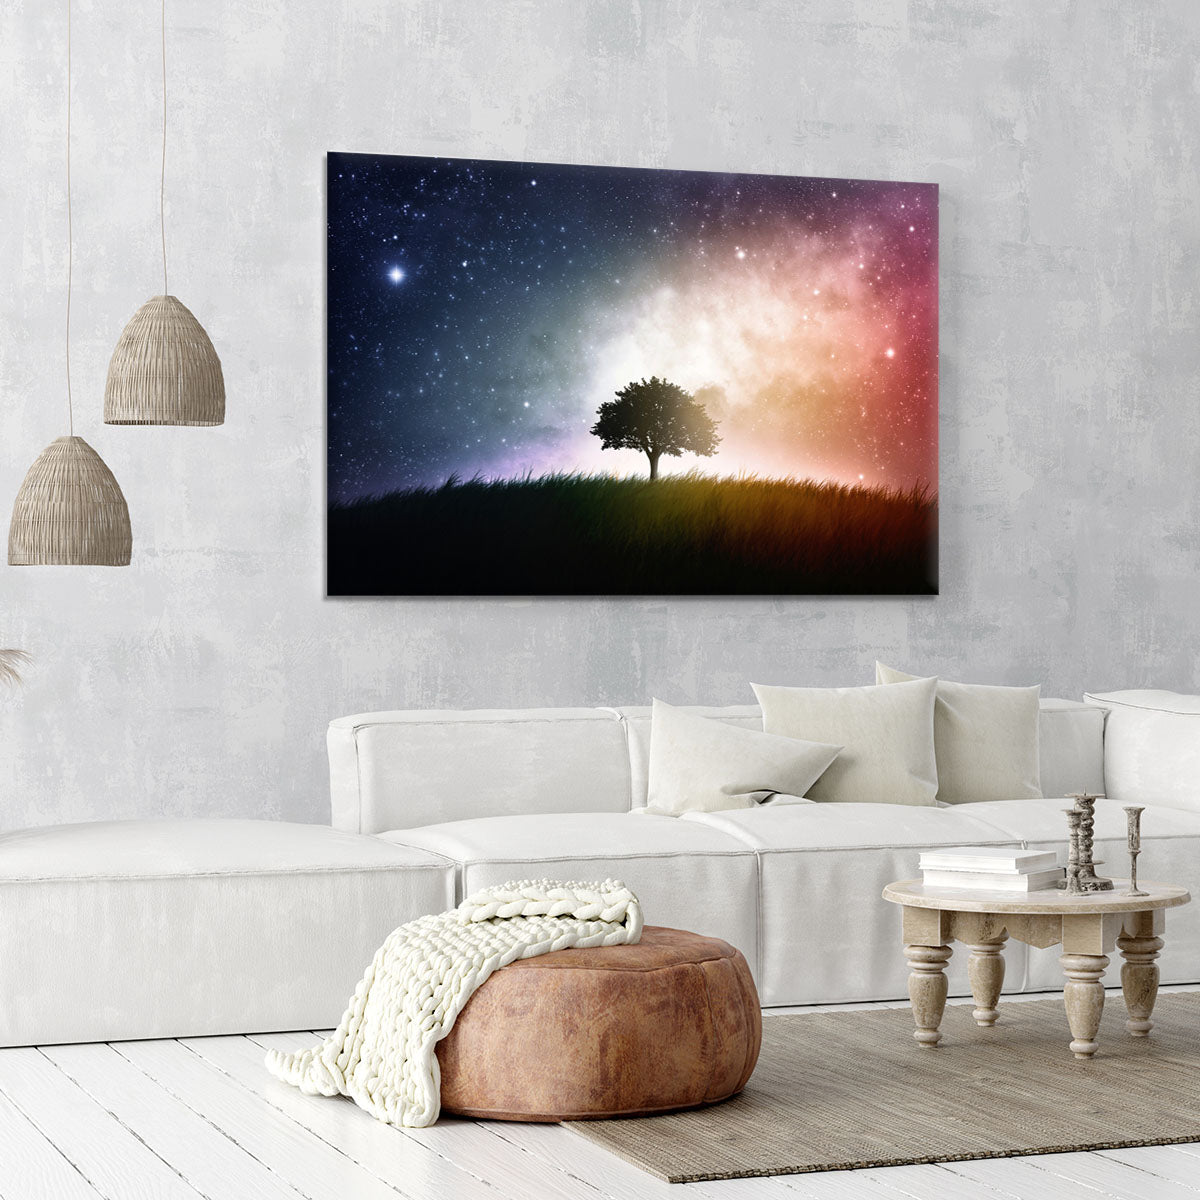 tree in a field with beautiful space background Canvas Print or Poster - Canvas Art Rocks - 6